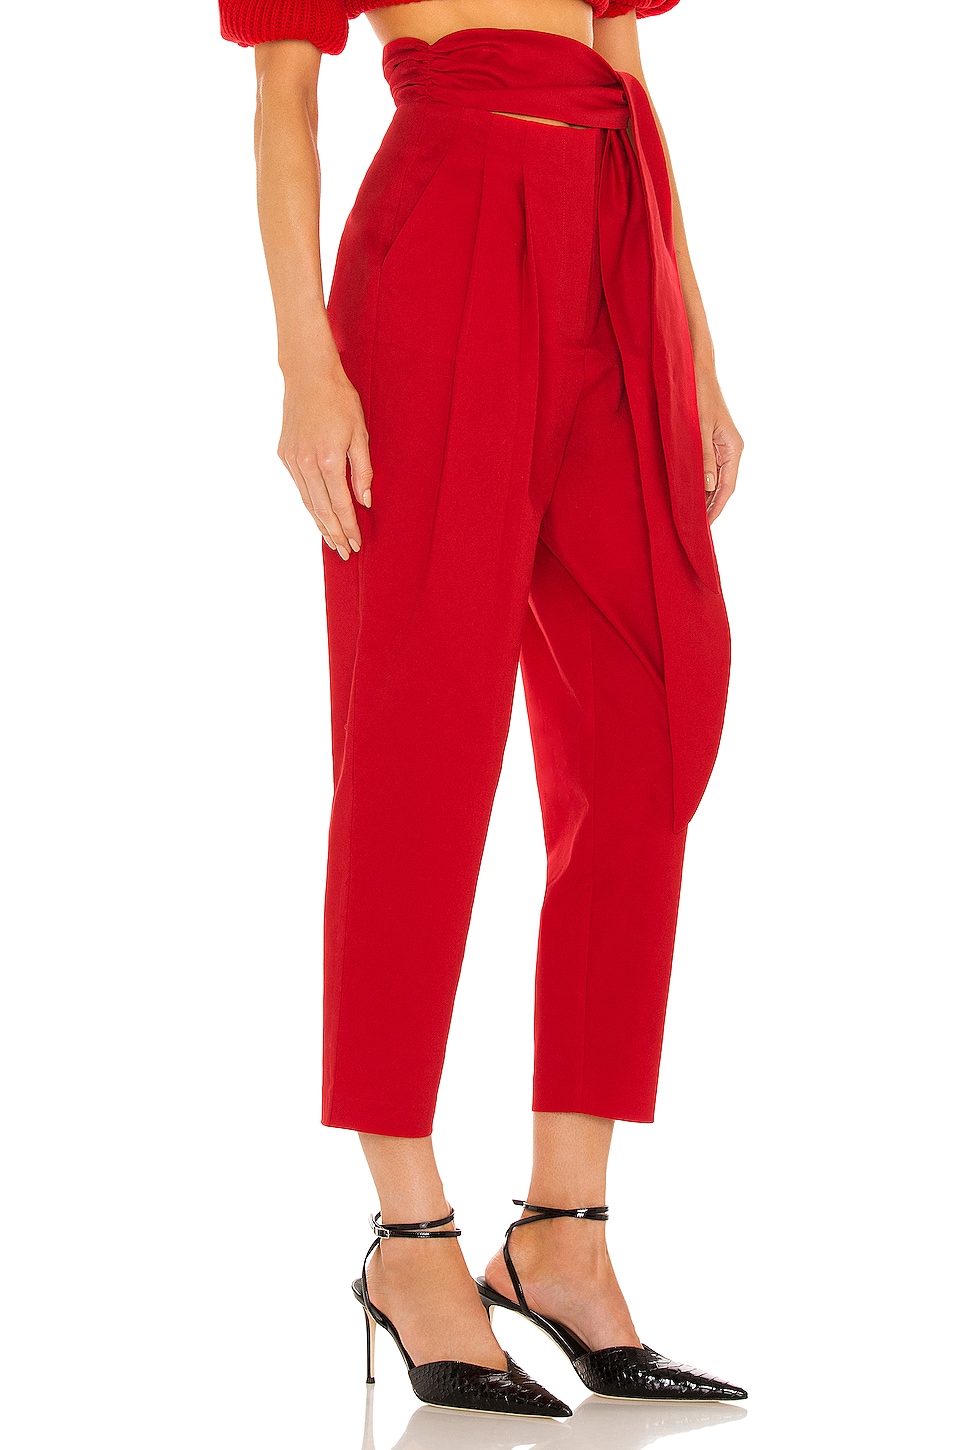 Paper bag trousers - Red - Ladies | H&M IN